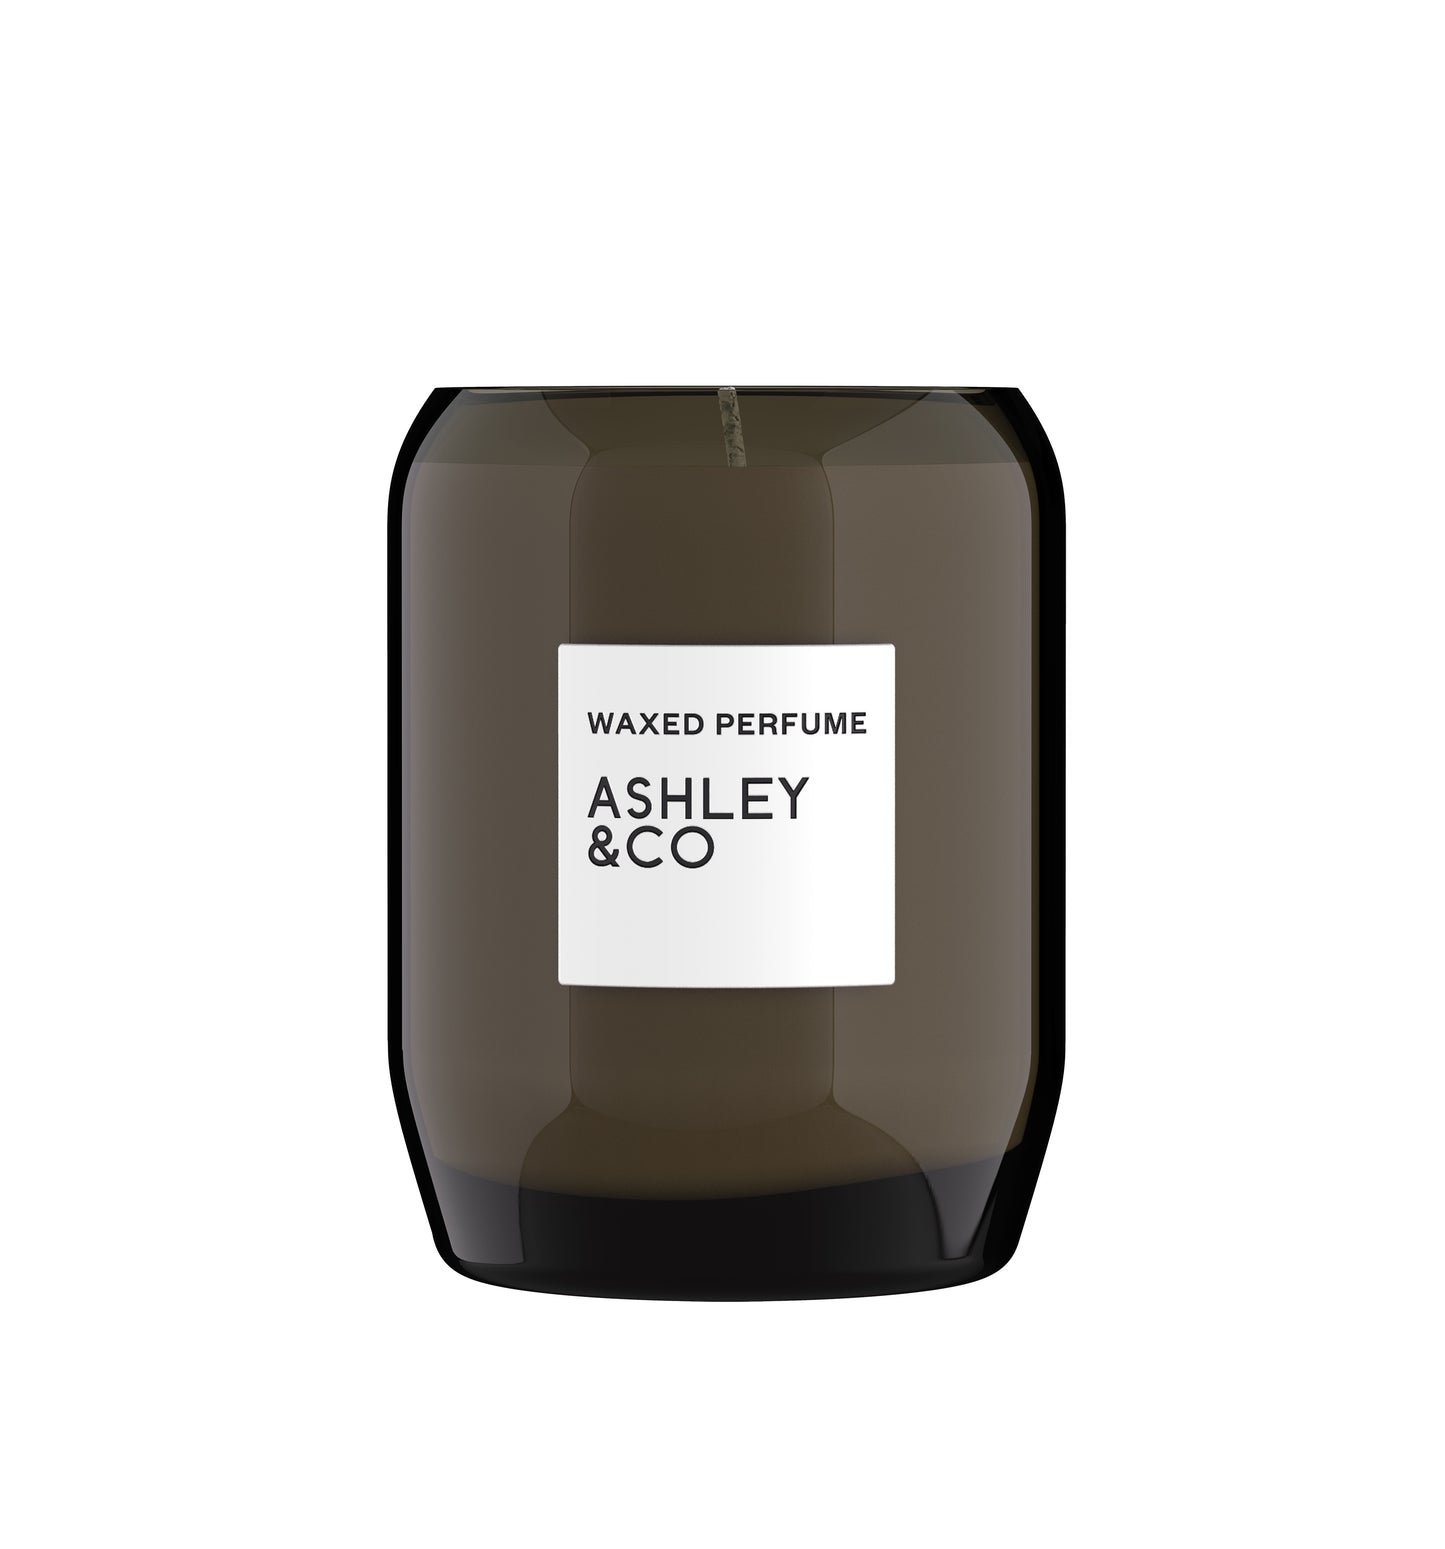 Ashley & Co's waxed perfume is as it sounds; 100% natural wax mixed with their signature scent.  This perfumed candle is crafted and poured by hand locally, here in New Zealand. ​​​​​​​ The candle is fragranced with one of Ashley & Co’s signature scents, Once Upon A Time. The scent is of hypnotic blooms of black gardenia, vetiver and figs.  Scent:  Once Upon A Time  Size:  207g  Burn time:  40-45 hours